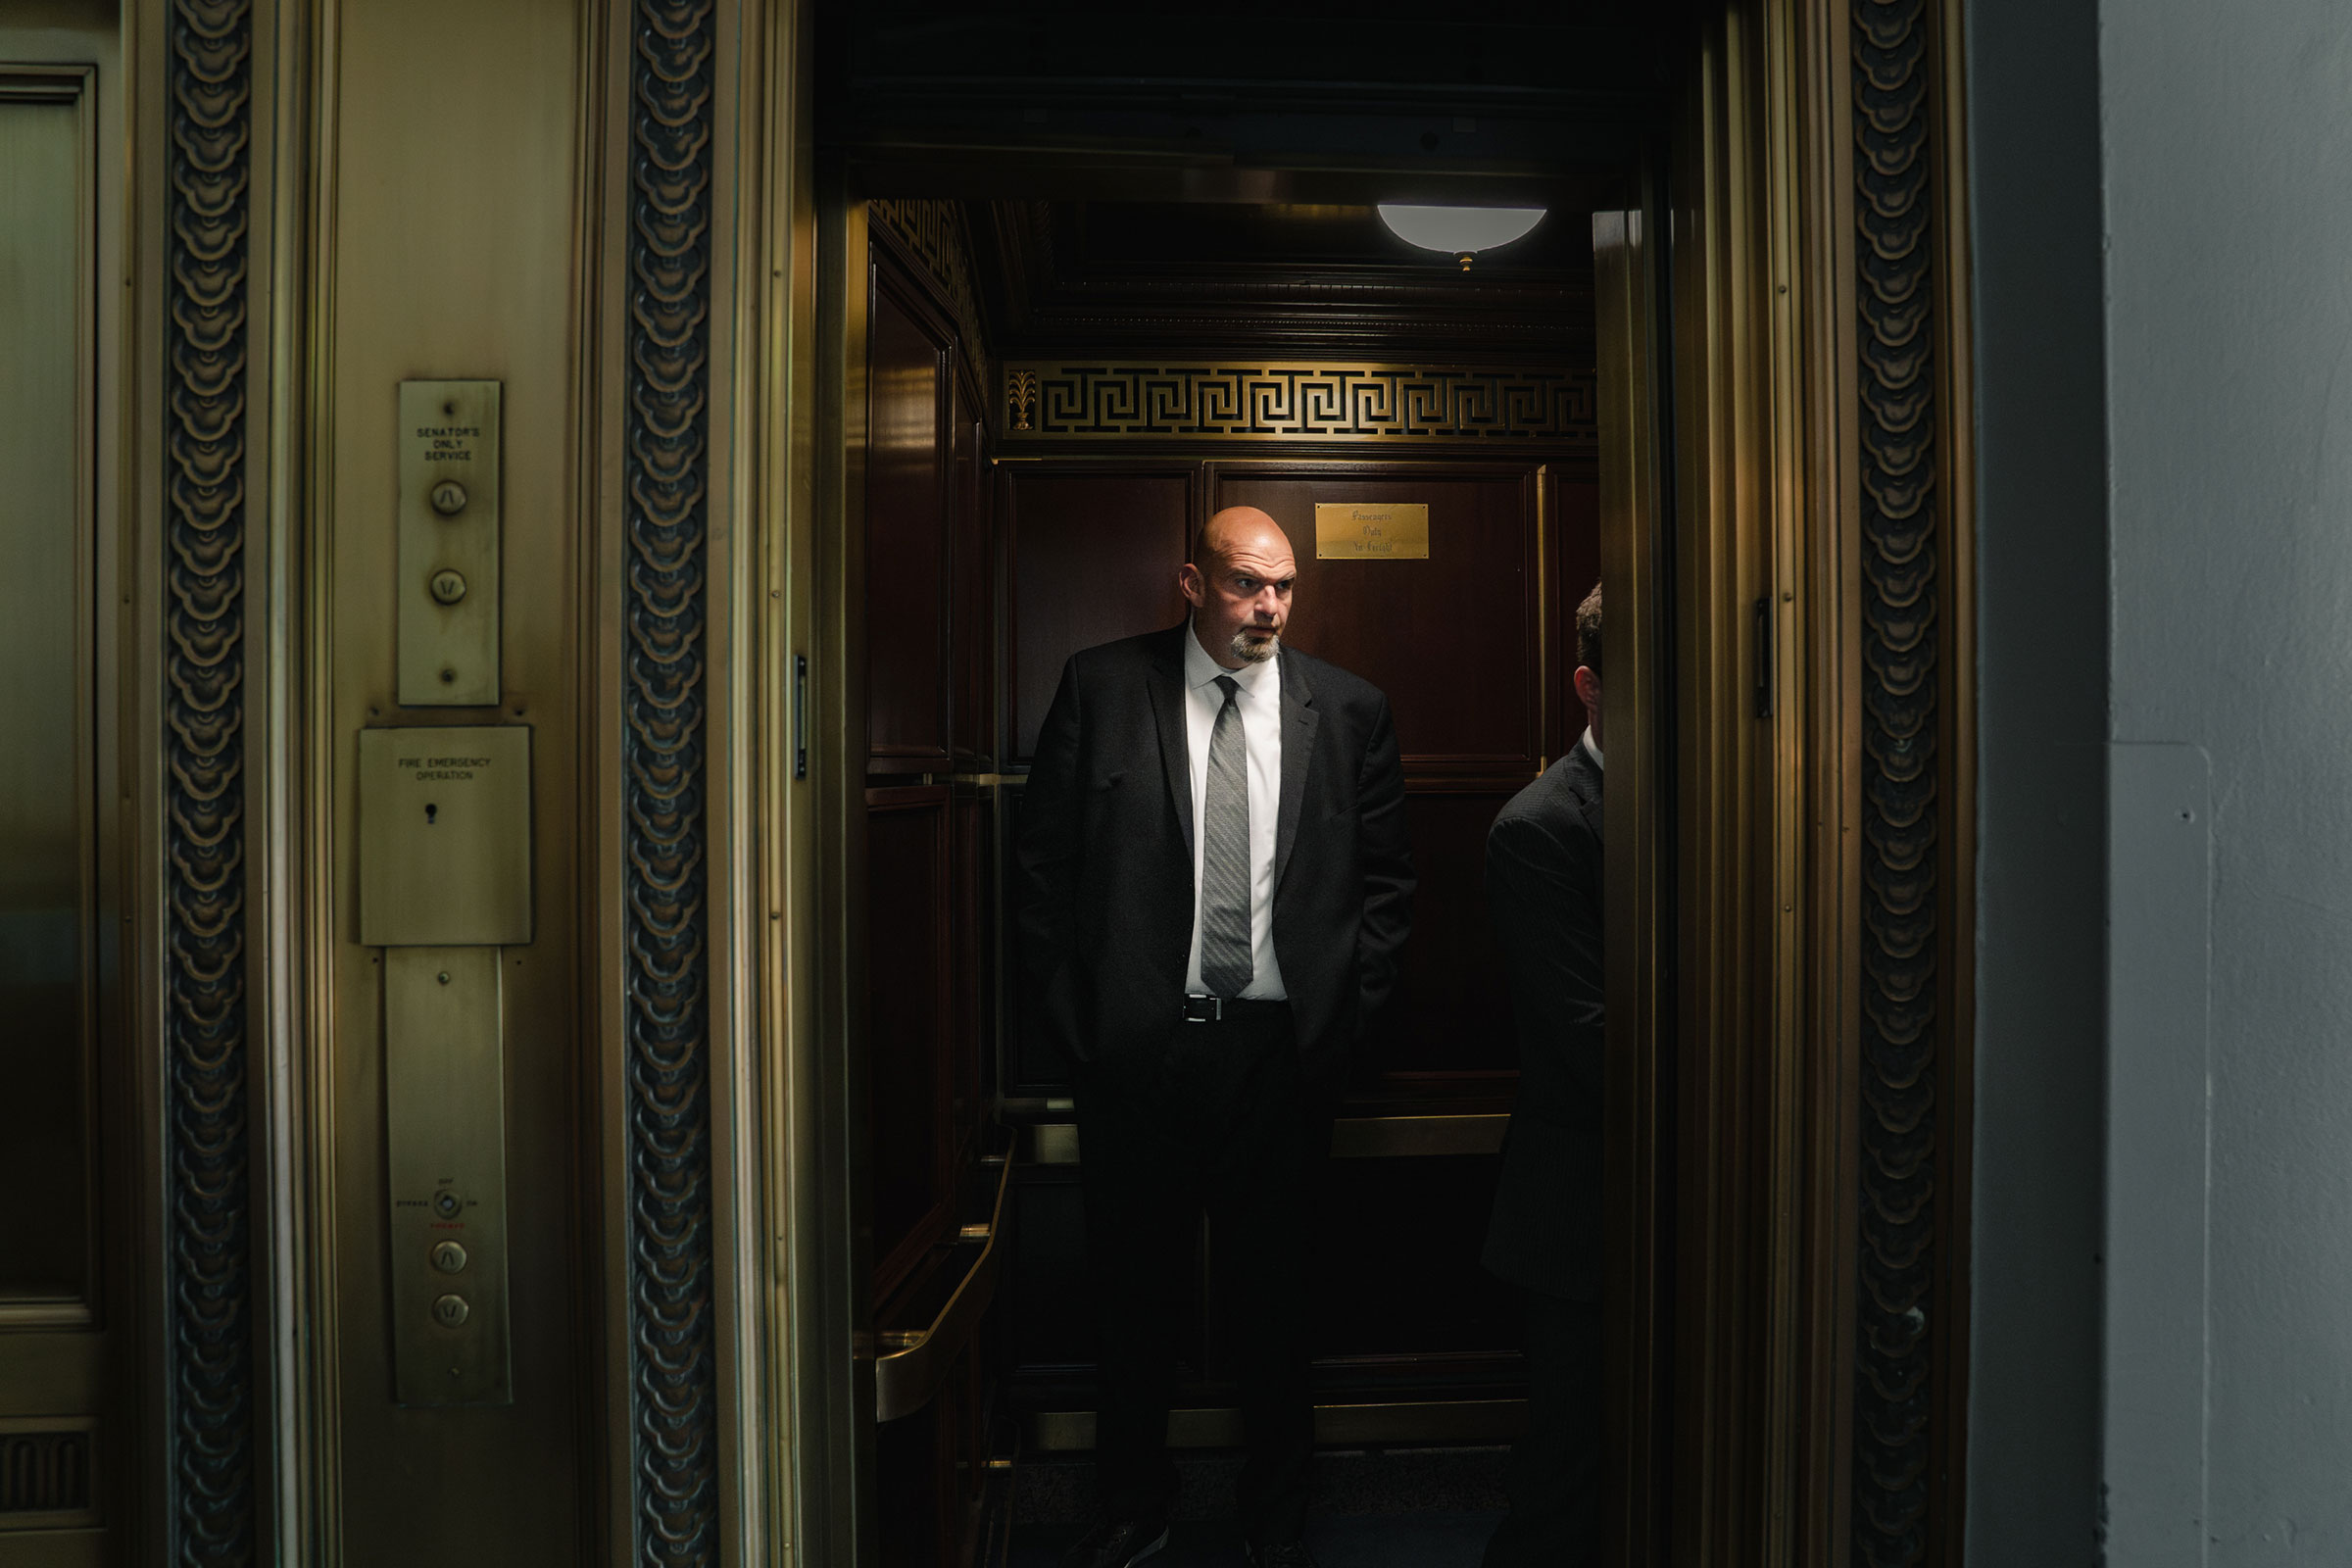 Fetterman takes the elevator before heading to a Senator vote on Capitol Hill (Shuran Huang for TIME)